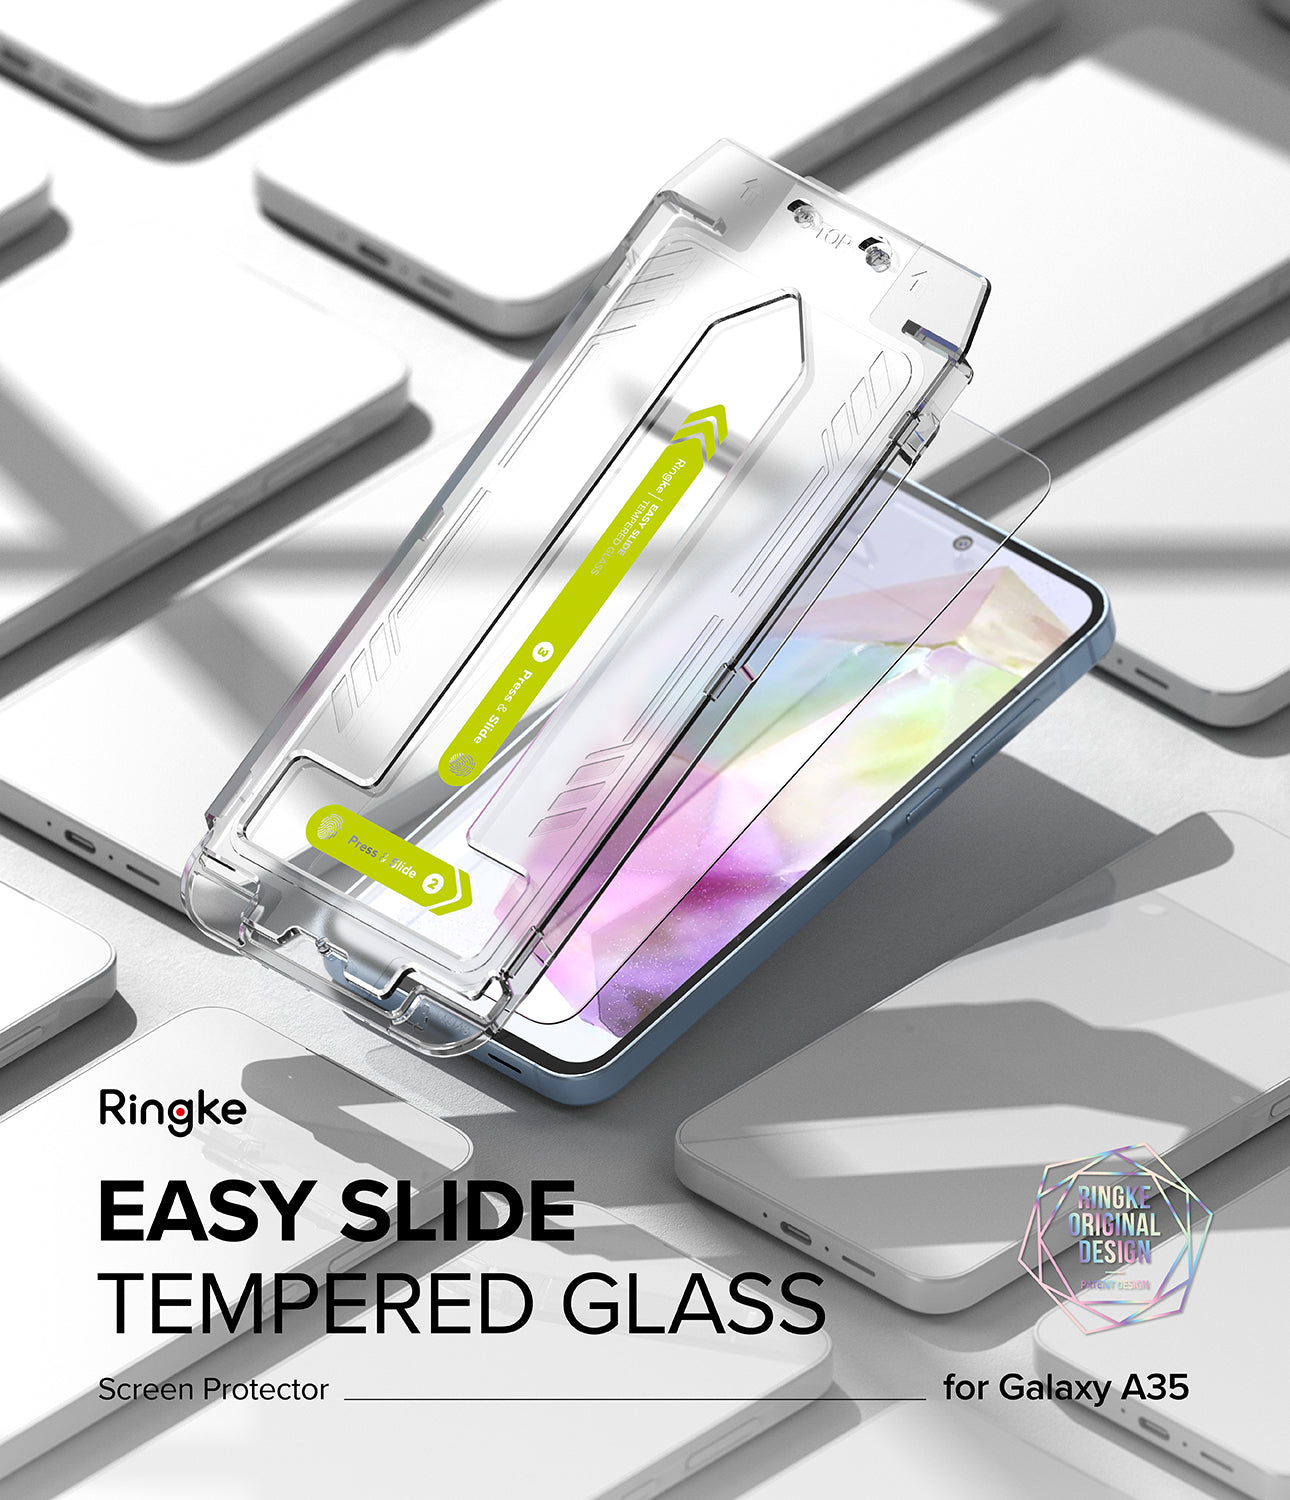 Galaxy A35 Screen Protector | Easy Slide Tempered Glass - By Ringke